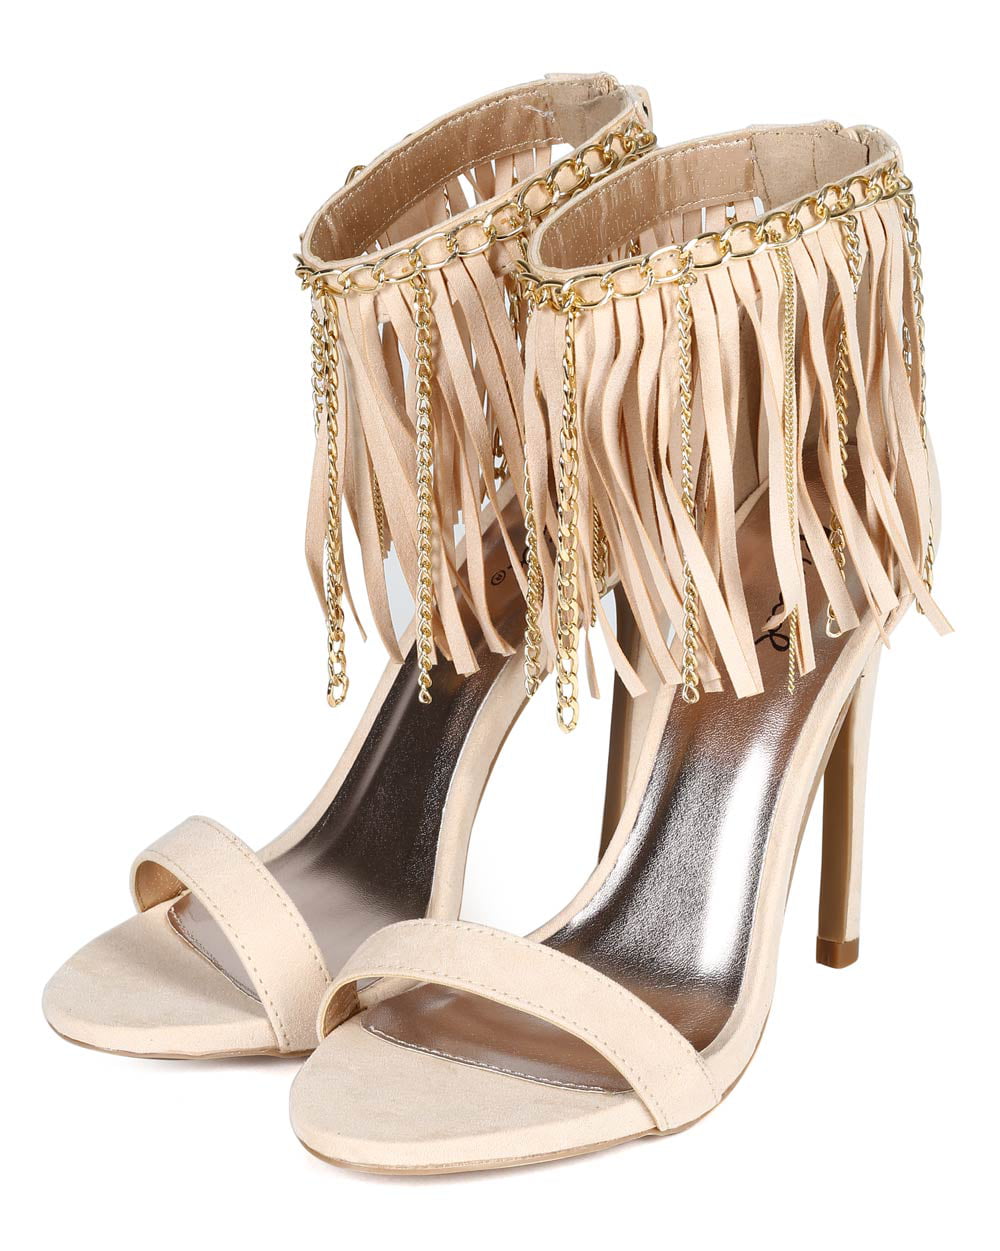 Details about   New Women Qupid Glee-78 Suede Open Toe Chain Fringe Ankle Cuff Stiletto Sandal 